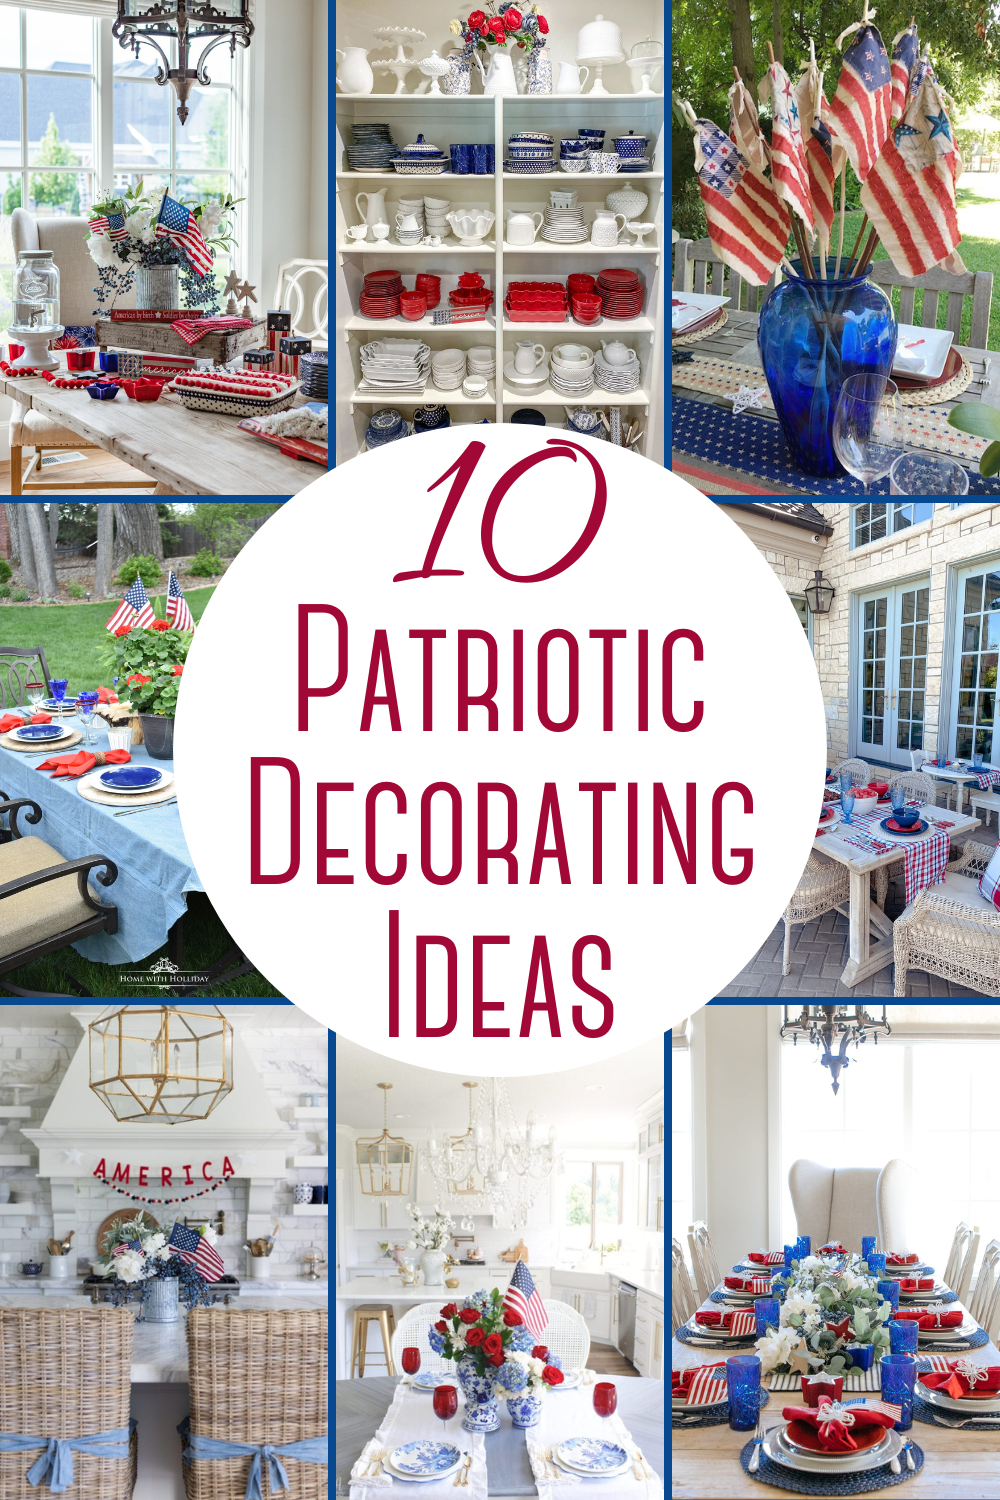 Looking for patriotic decorating ideas to add some flair to your home this summer? Check out these creative and festive ideas.